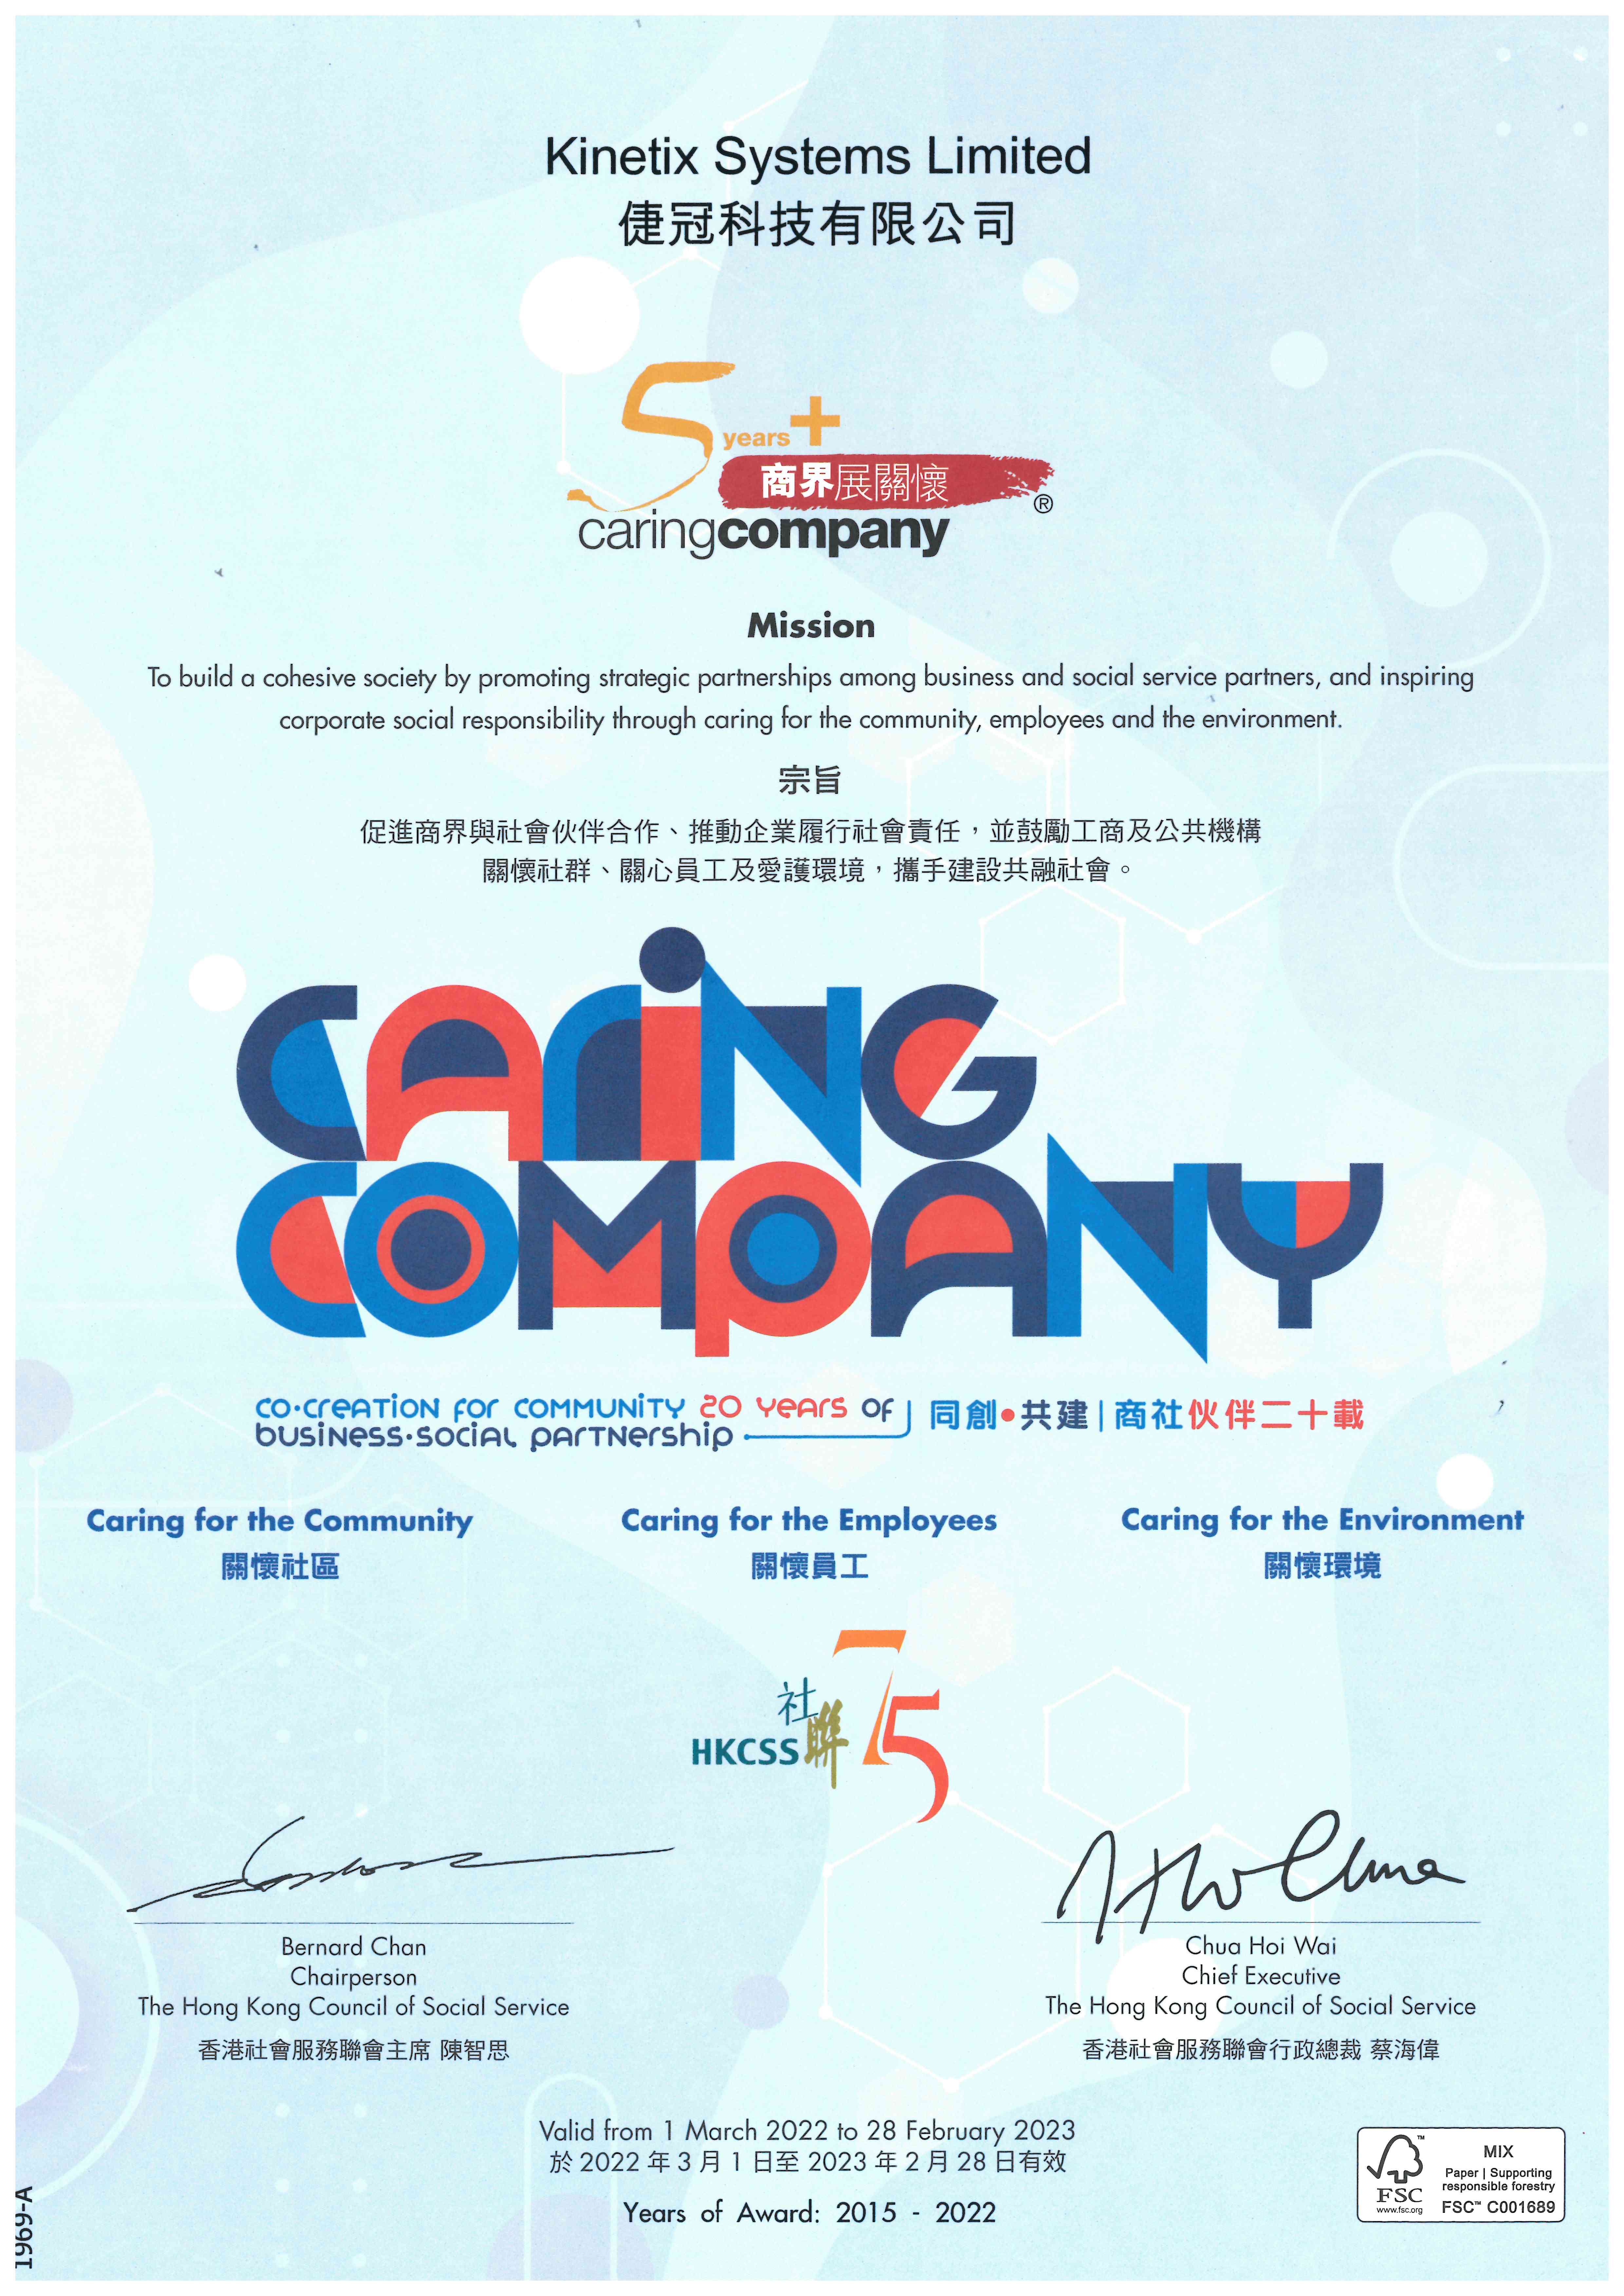 5 Years Plus Caring Company